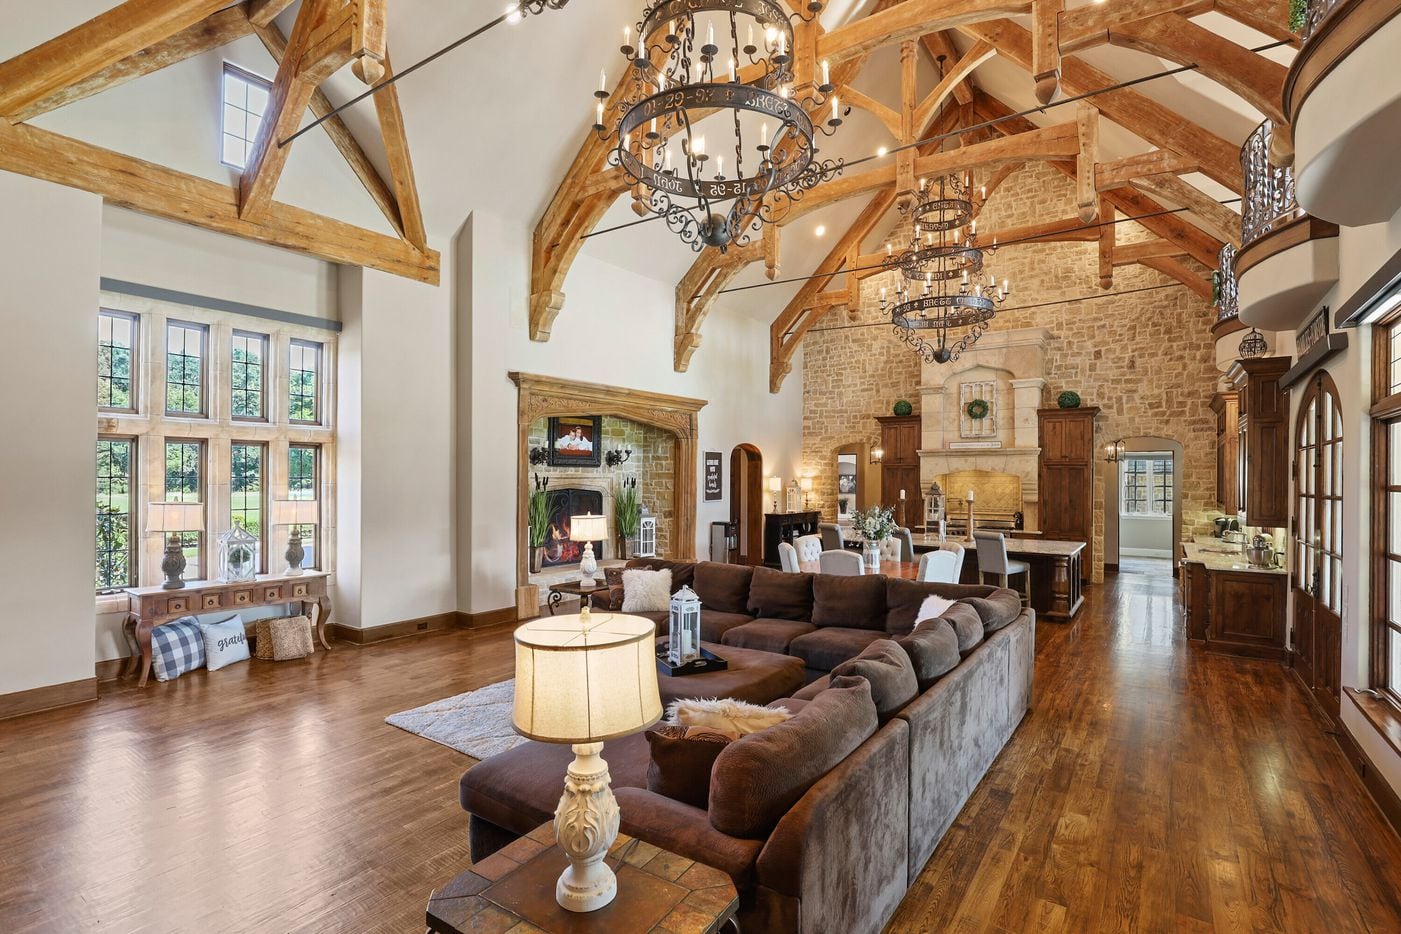 Take a look at the home at 2105 Bayshore Drive in Flower Mound.